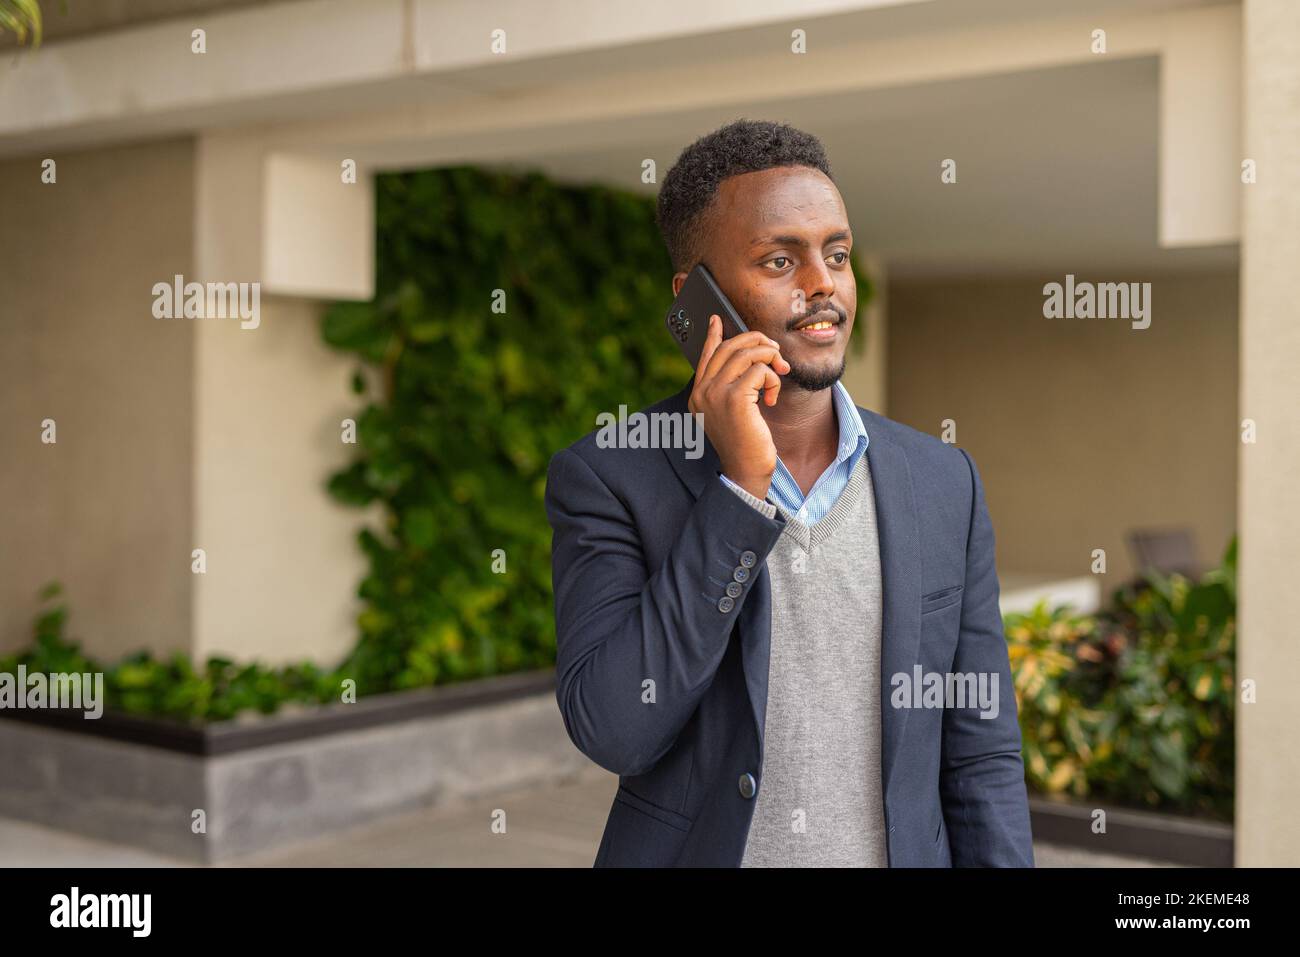 Portrait of handsome black African businessman wearing suit and talking on phone Stock Photo